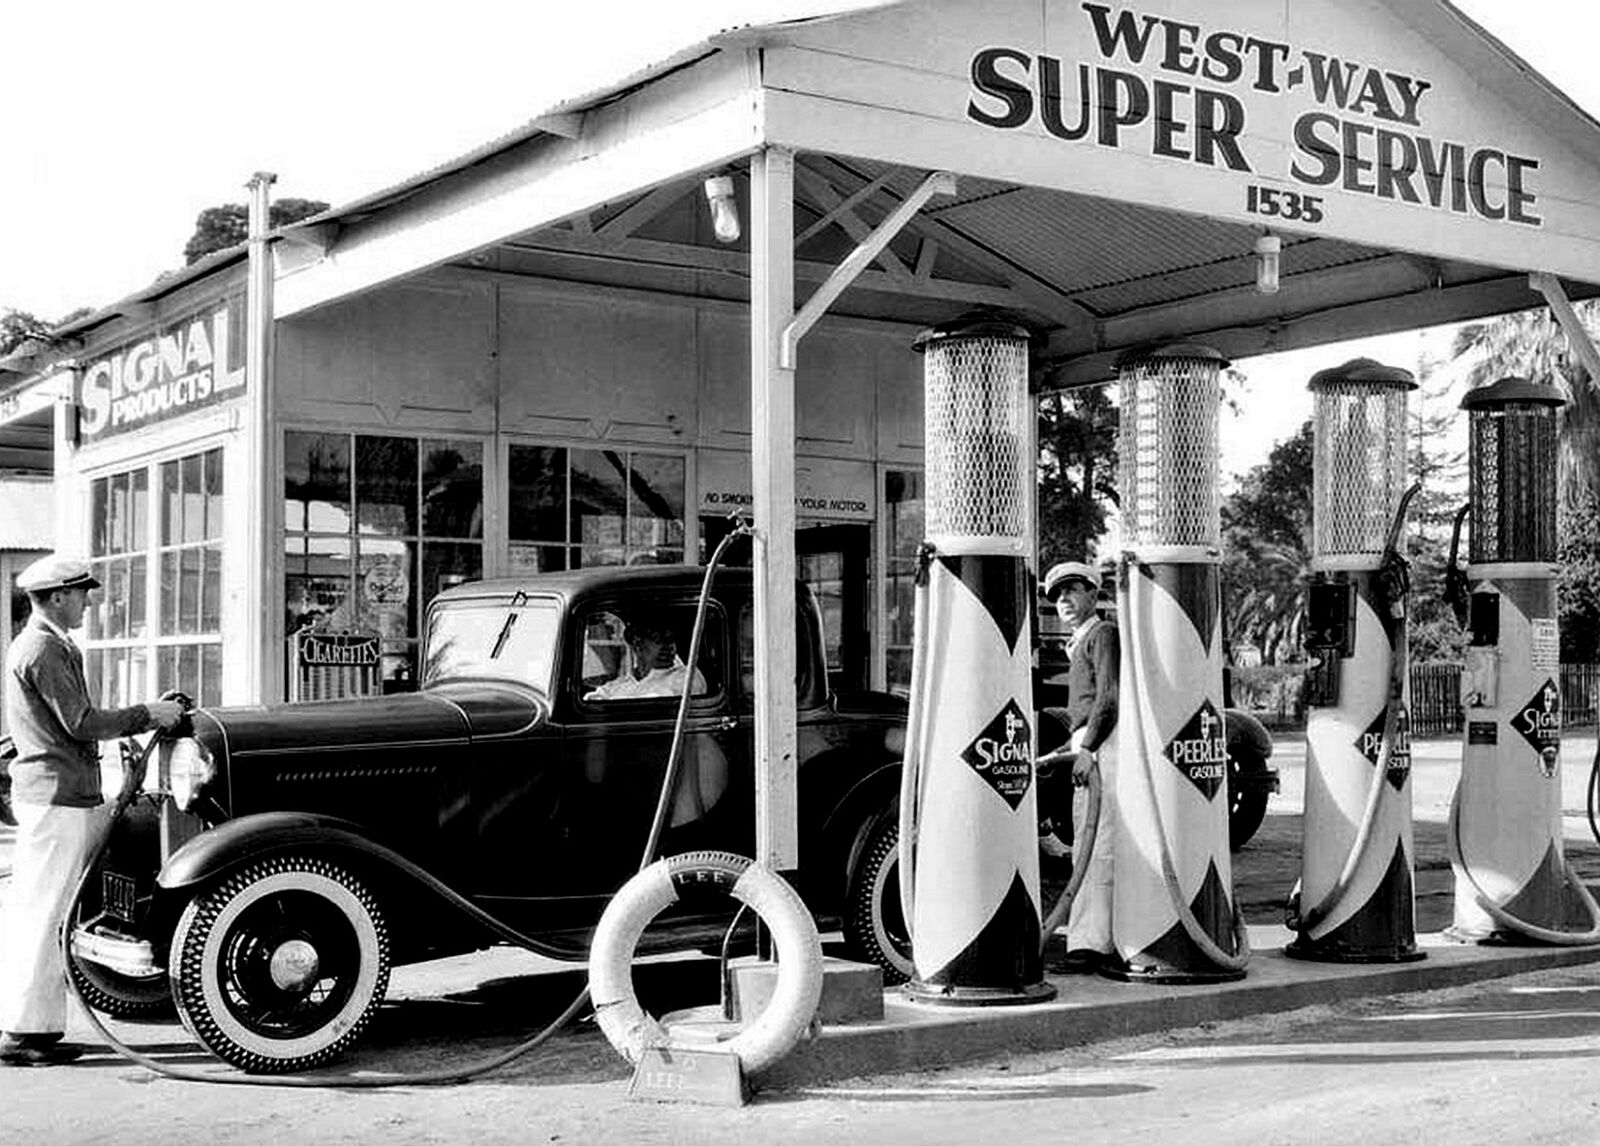 1932 FORD V-8 at a Los Angeles SIGNAL OIL Photo  (188-0)